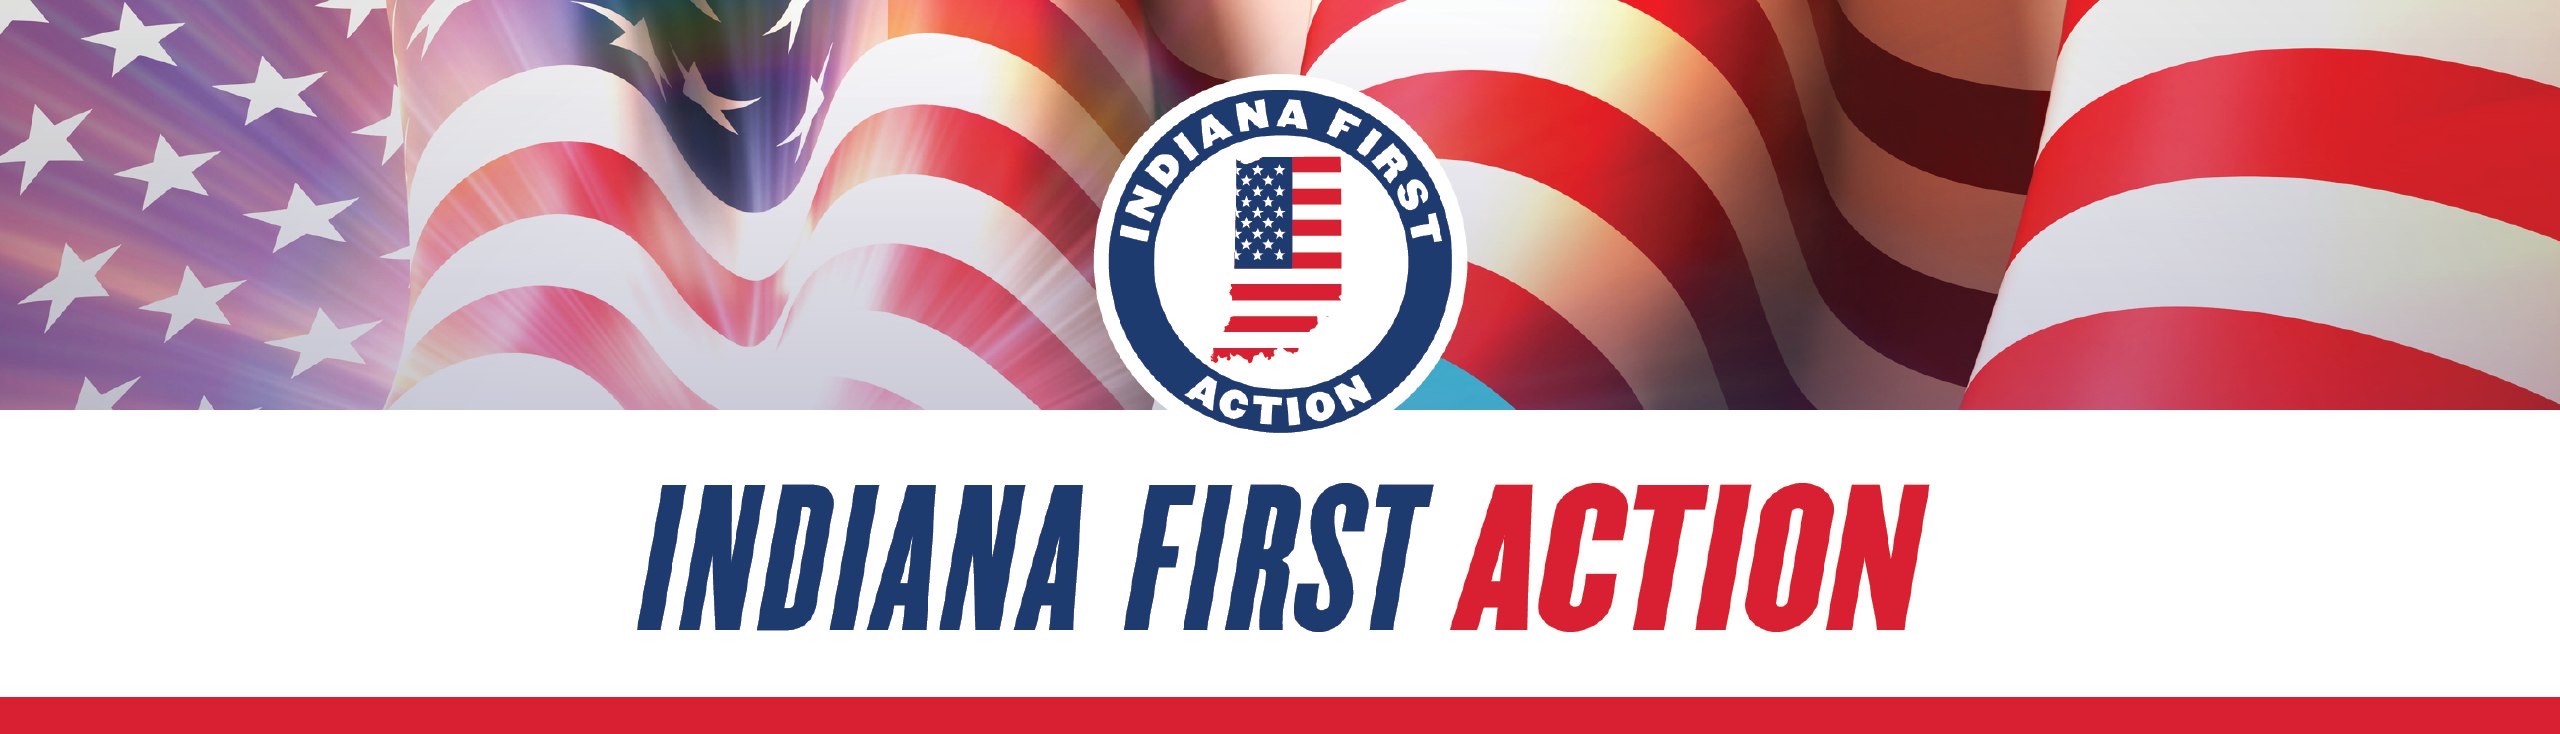 Cast Vote Record (CVR) Manipulation - Indiana First Action